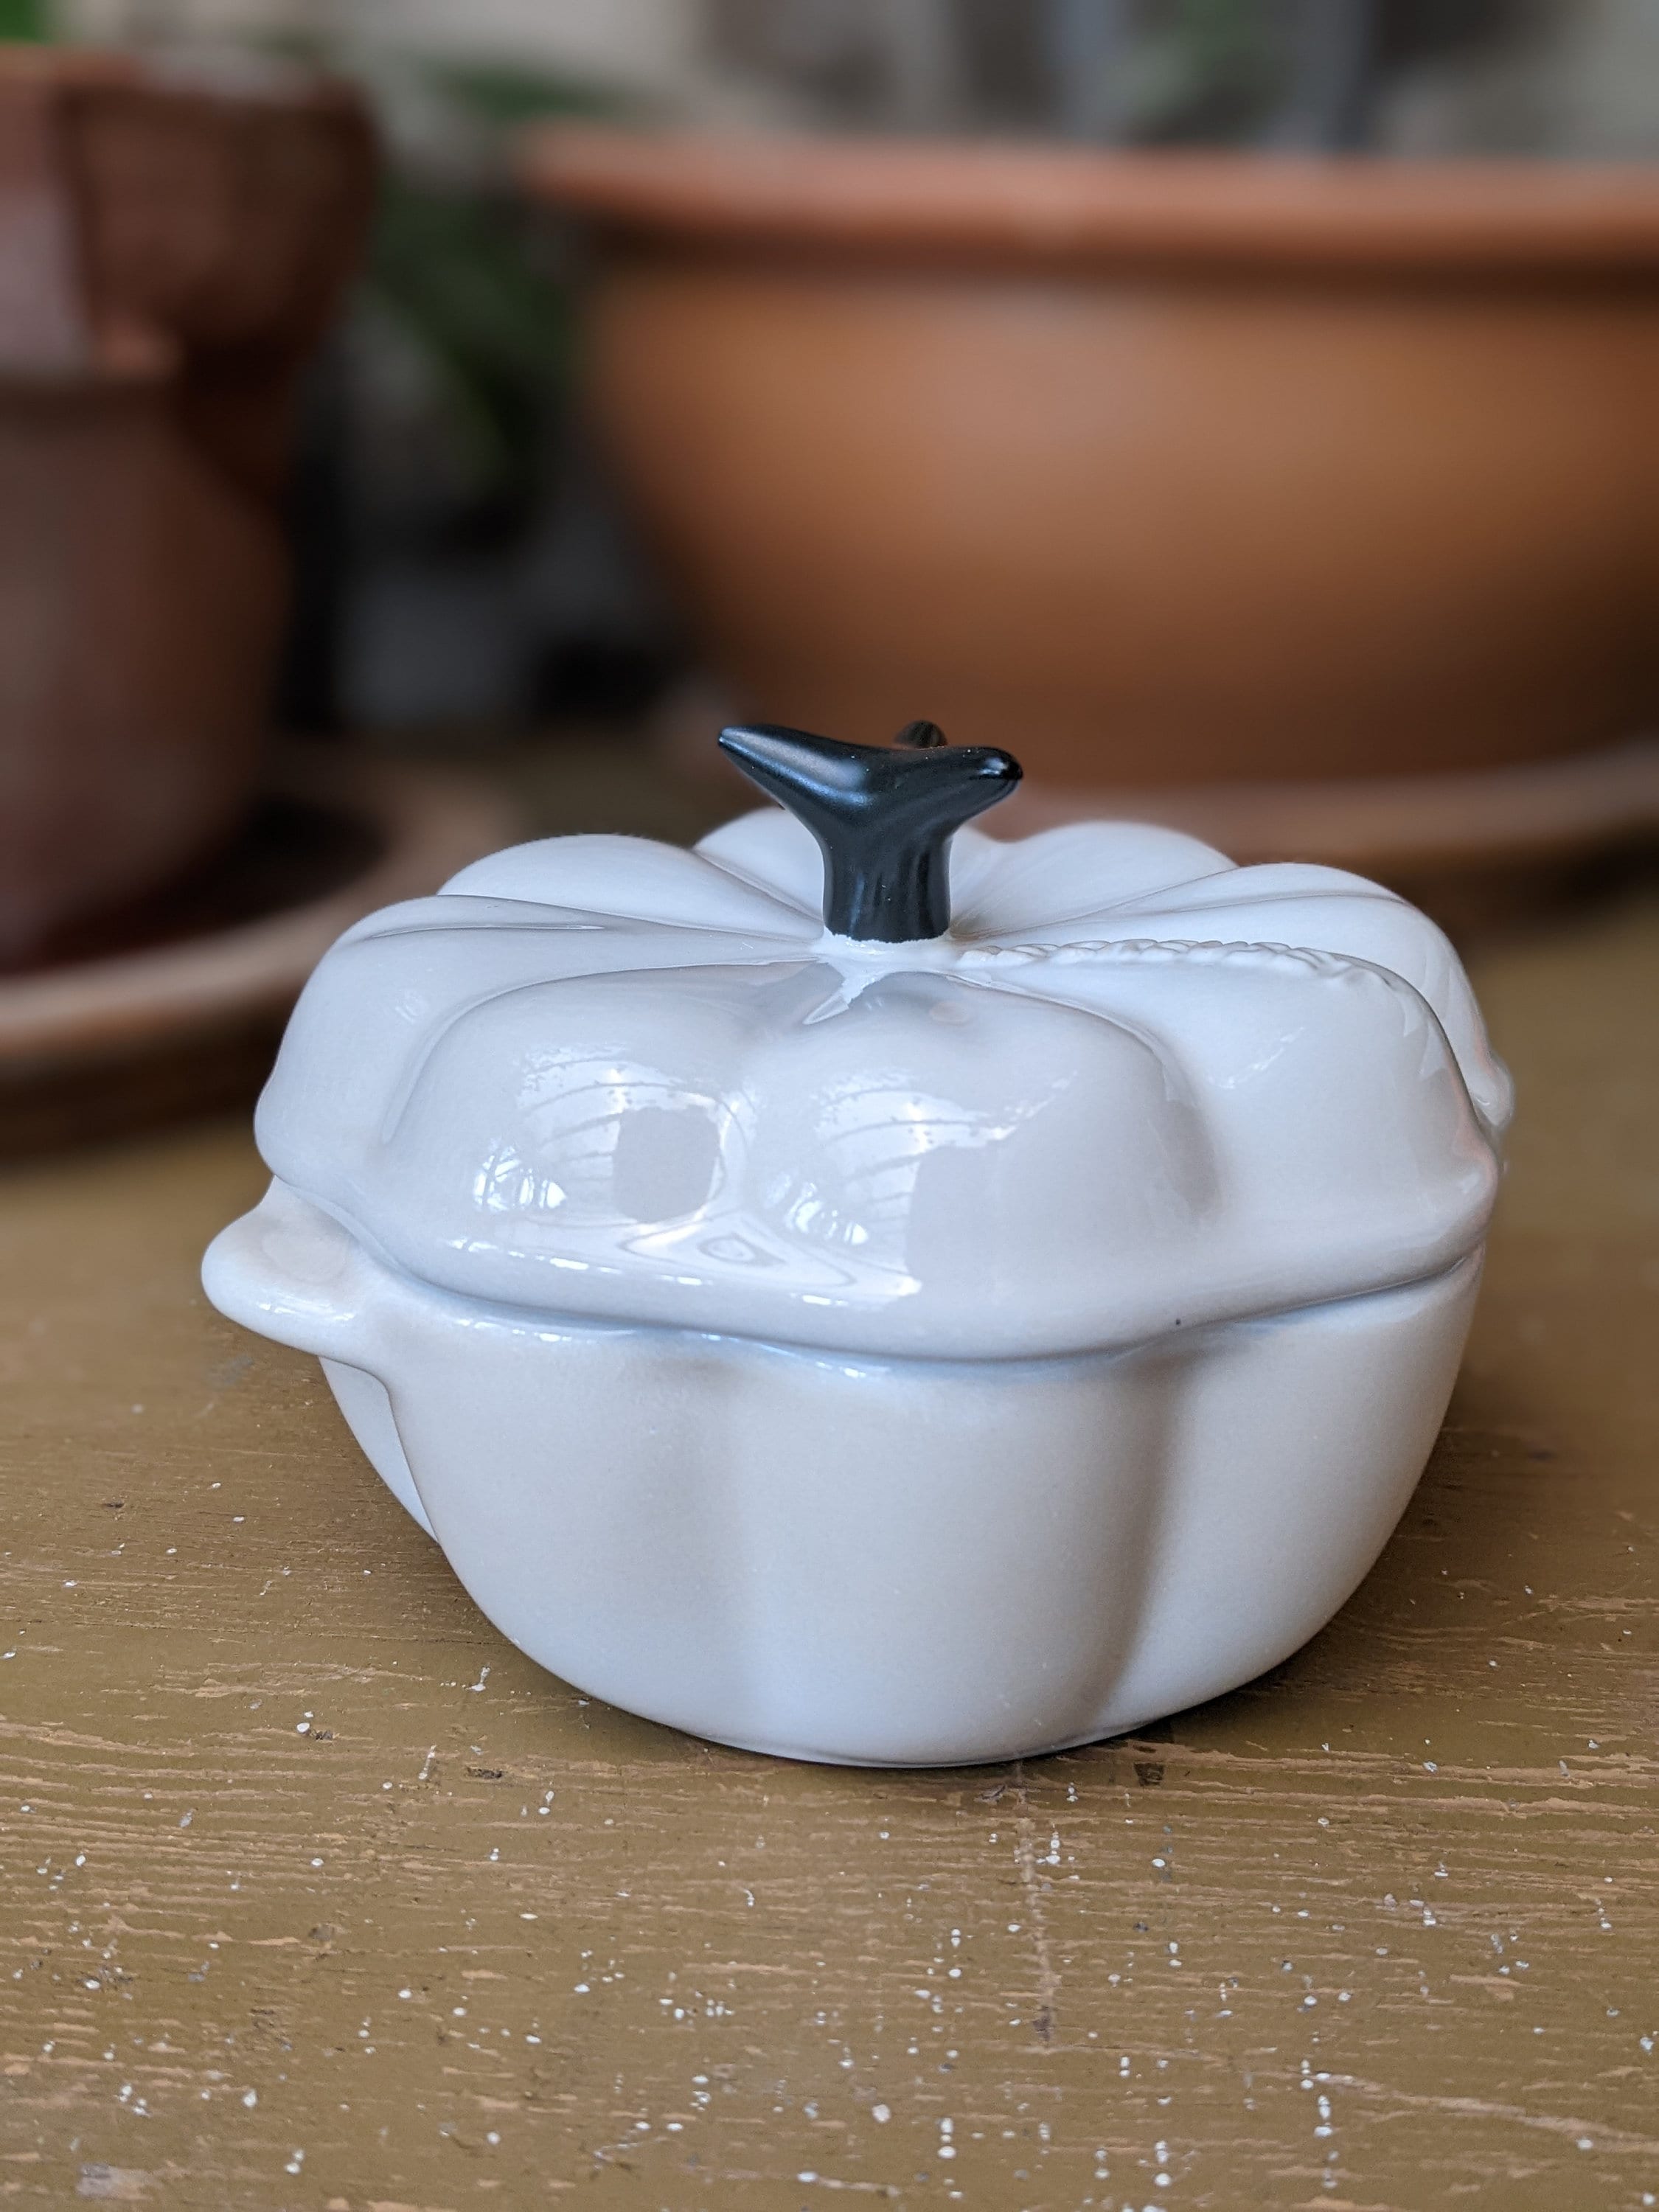 Where to Find the Le Creuset Pumpkin Dutch Oven (and Other Cute